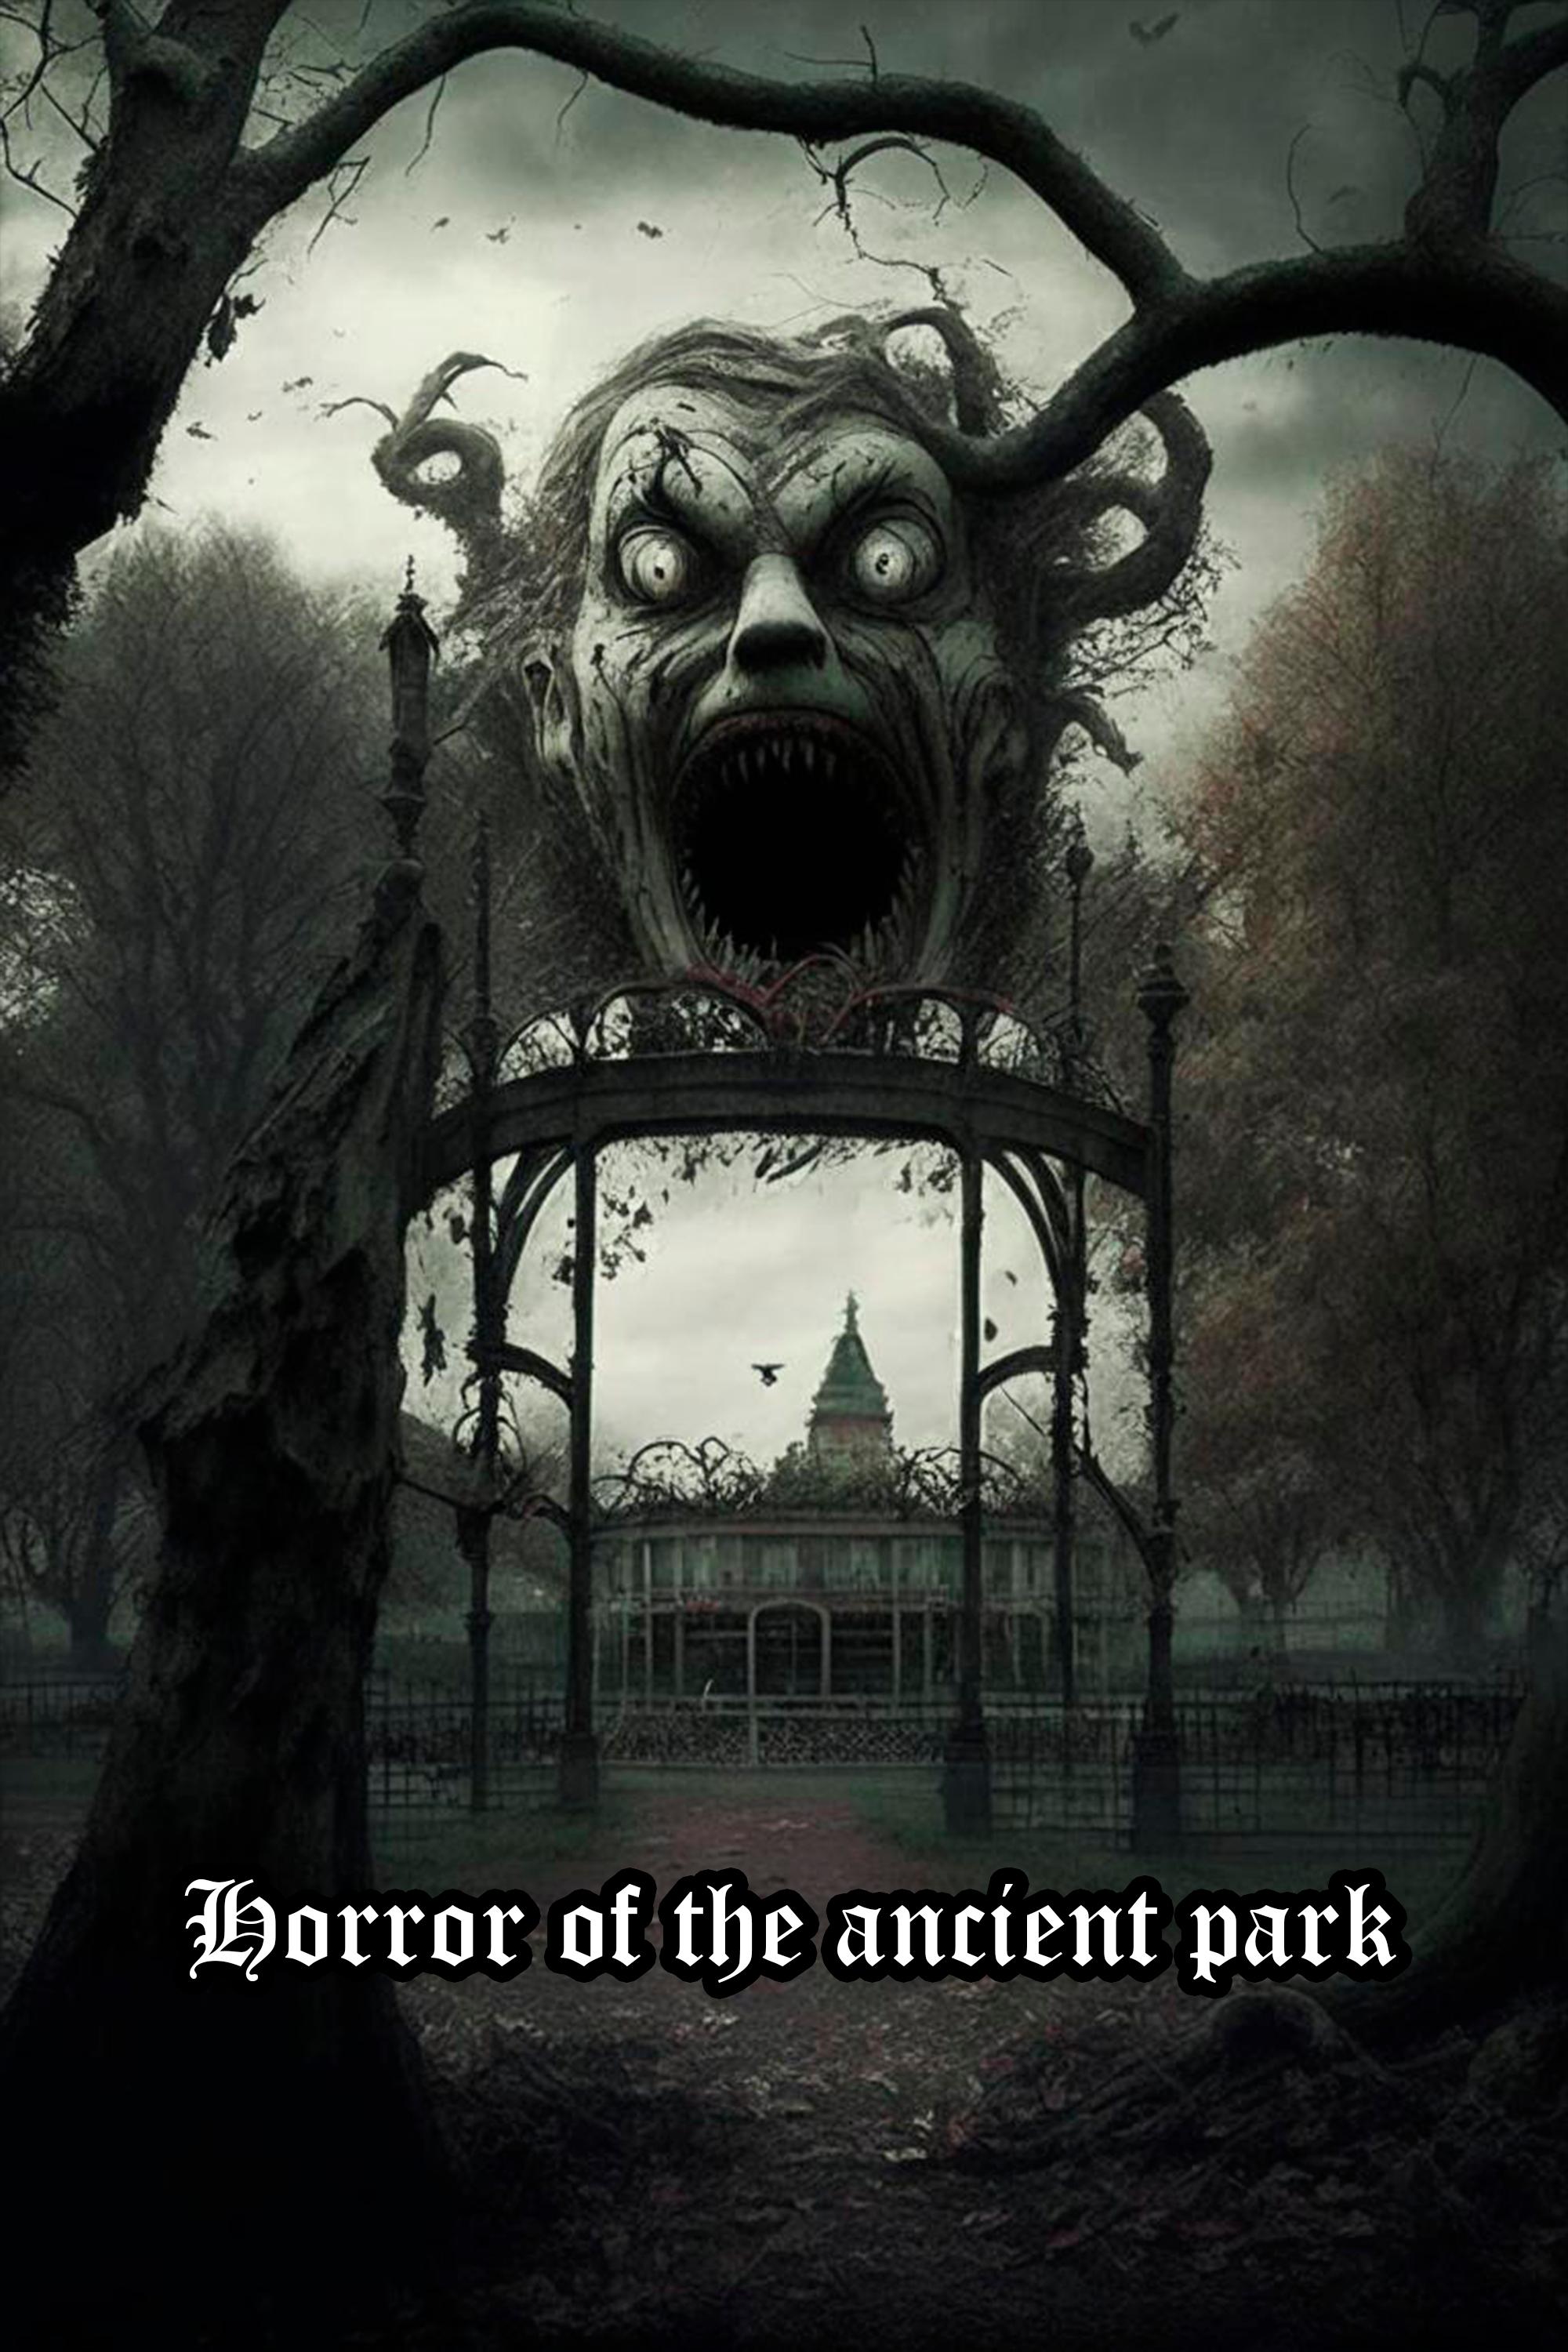 Horror of the ancient park